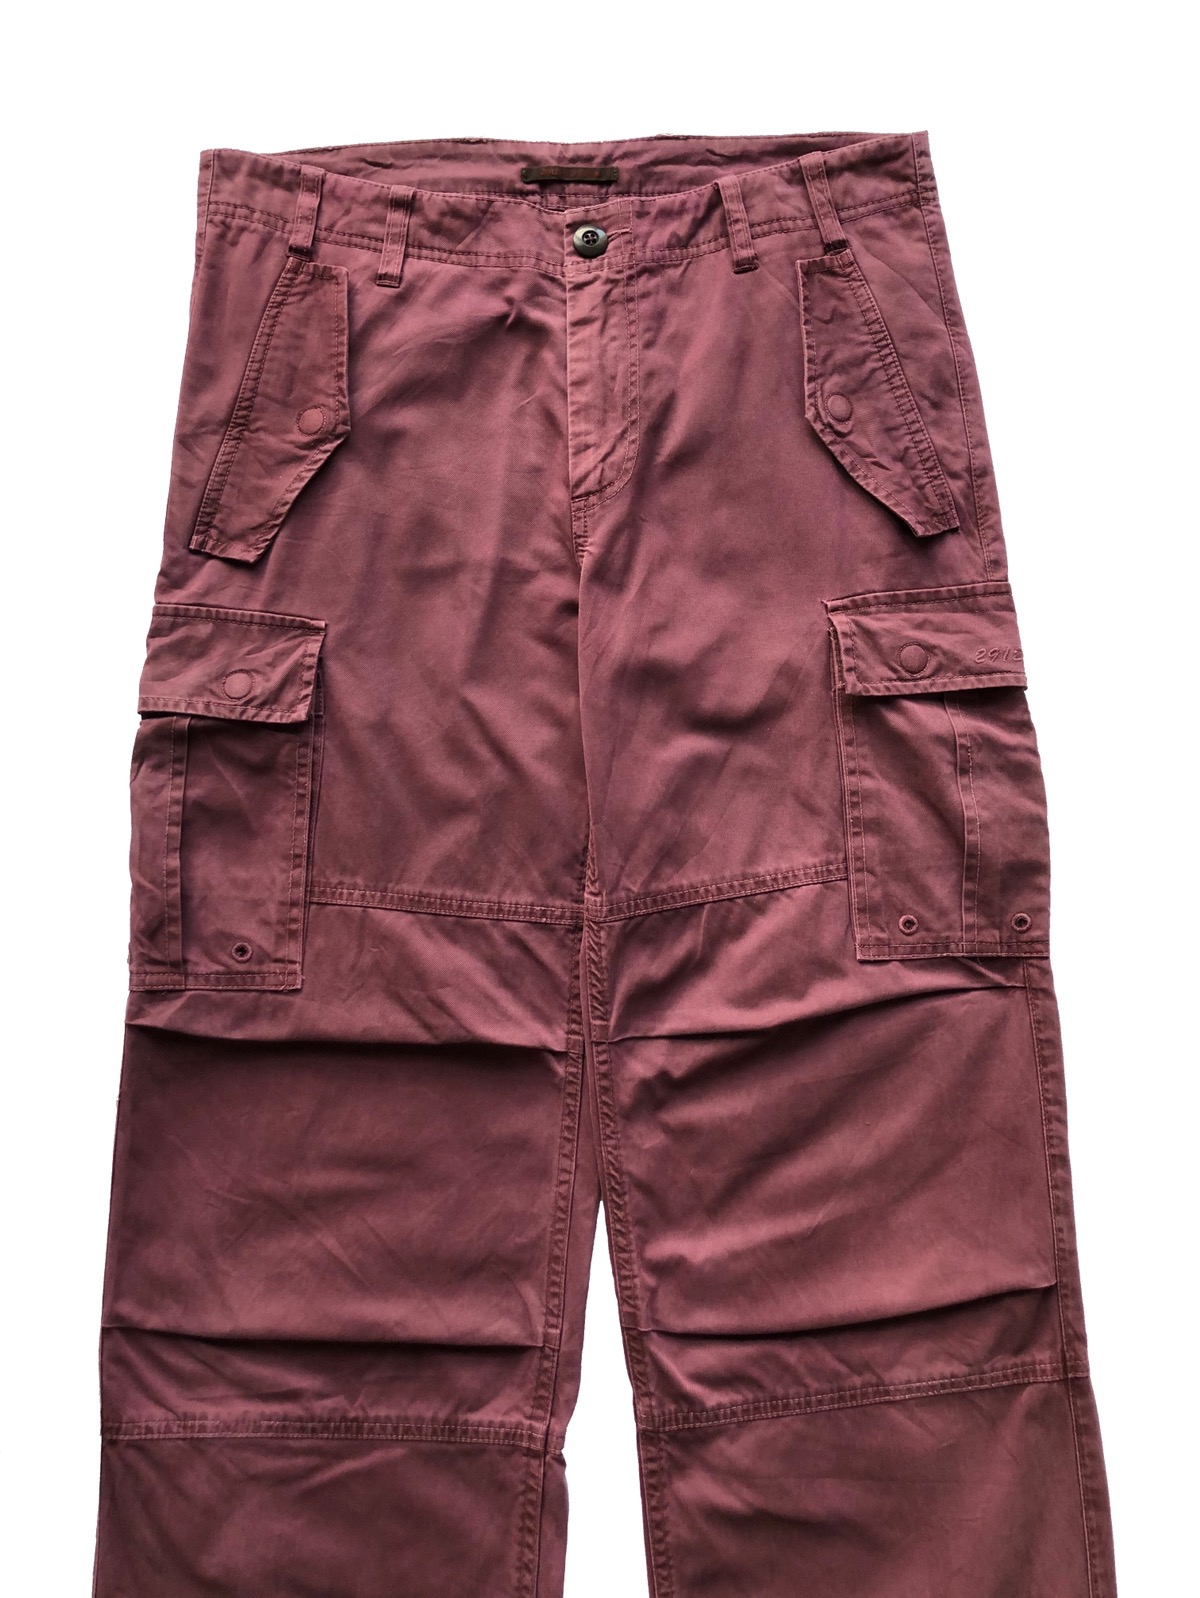 Japanese Brand - 1990s 291295 Homme Military Cargo Trousers - 3